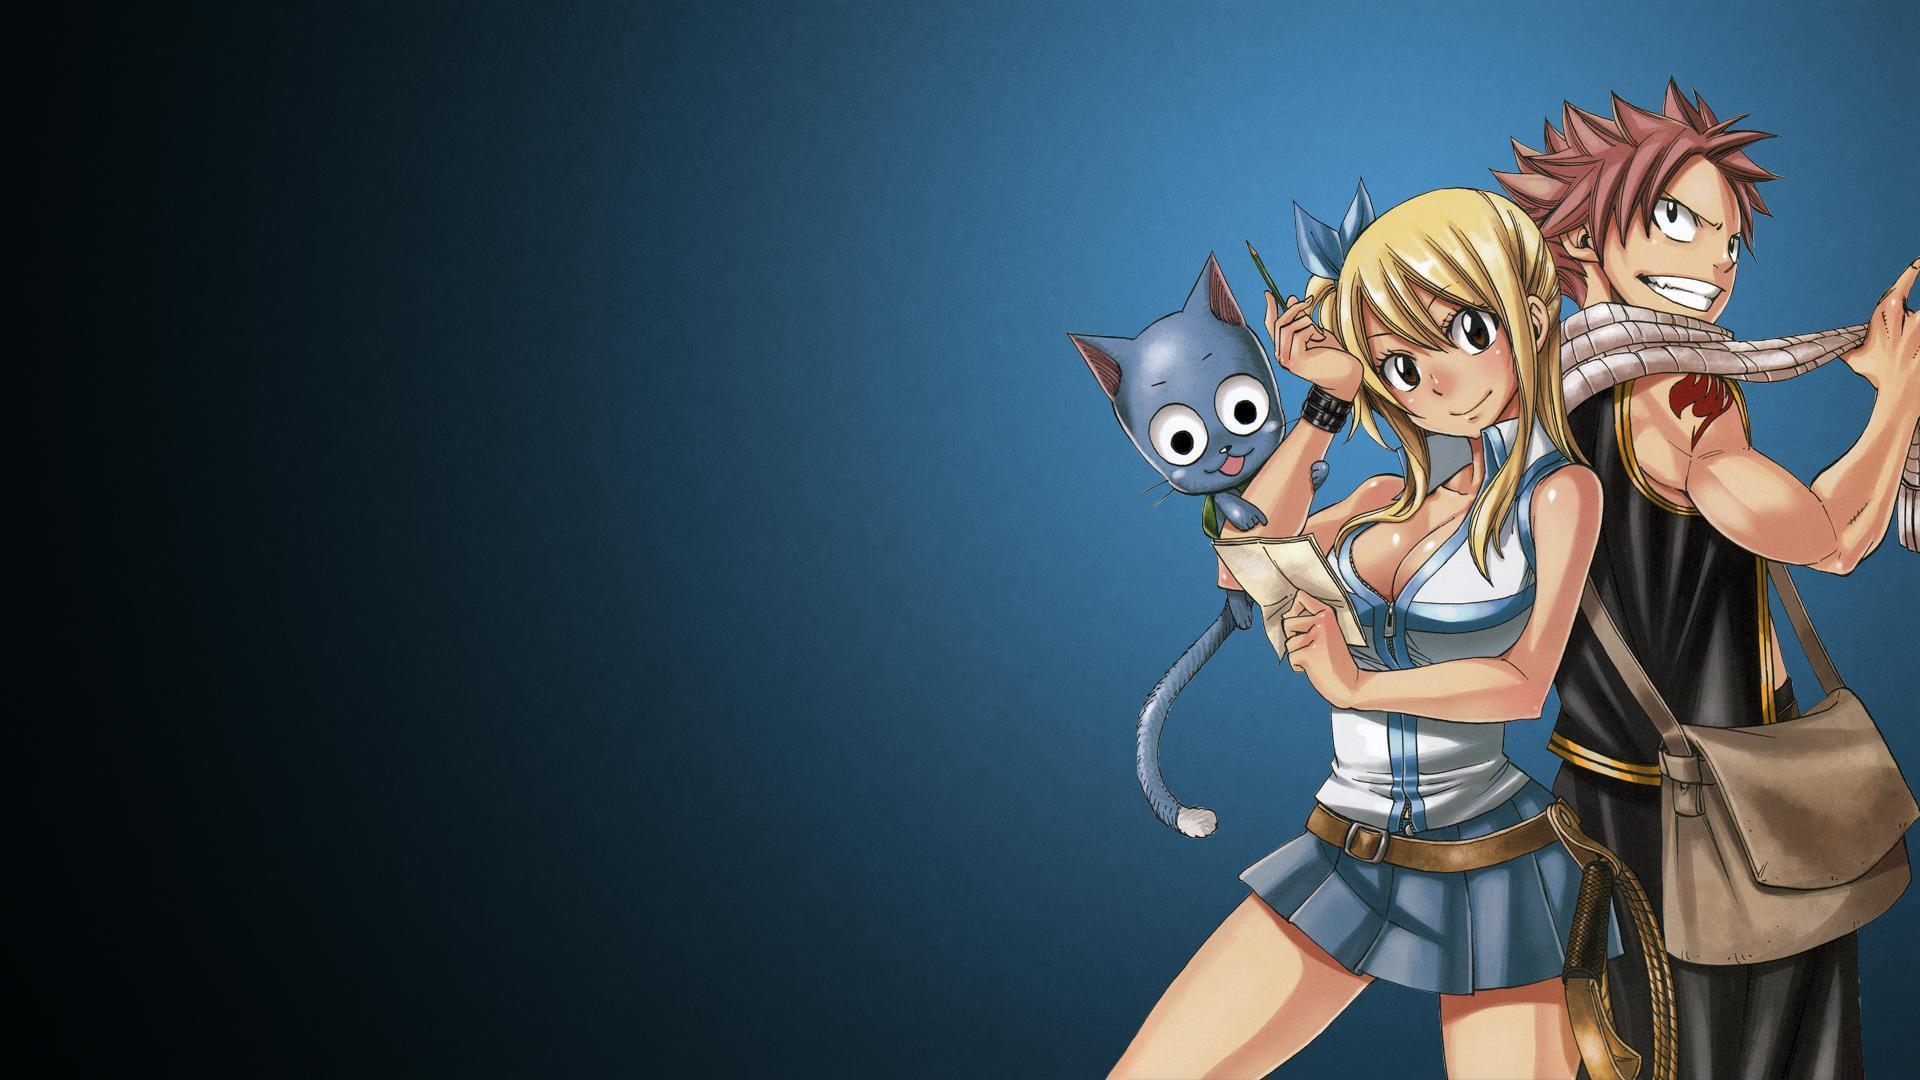 Wallpapers For > Fairy Tail Happy Wallpapers Hd 1920x1080